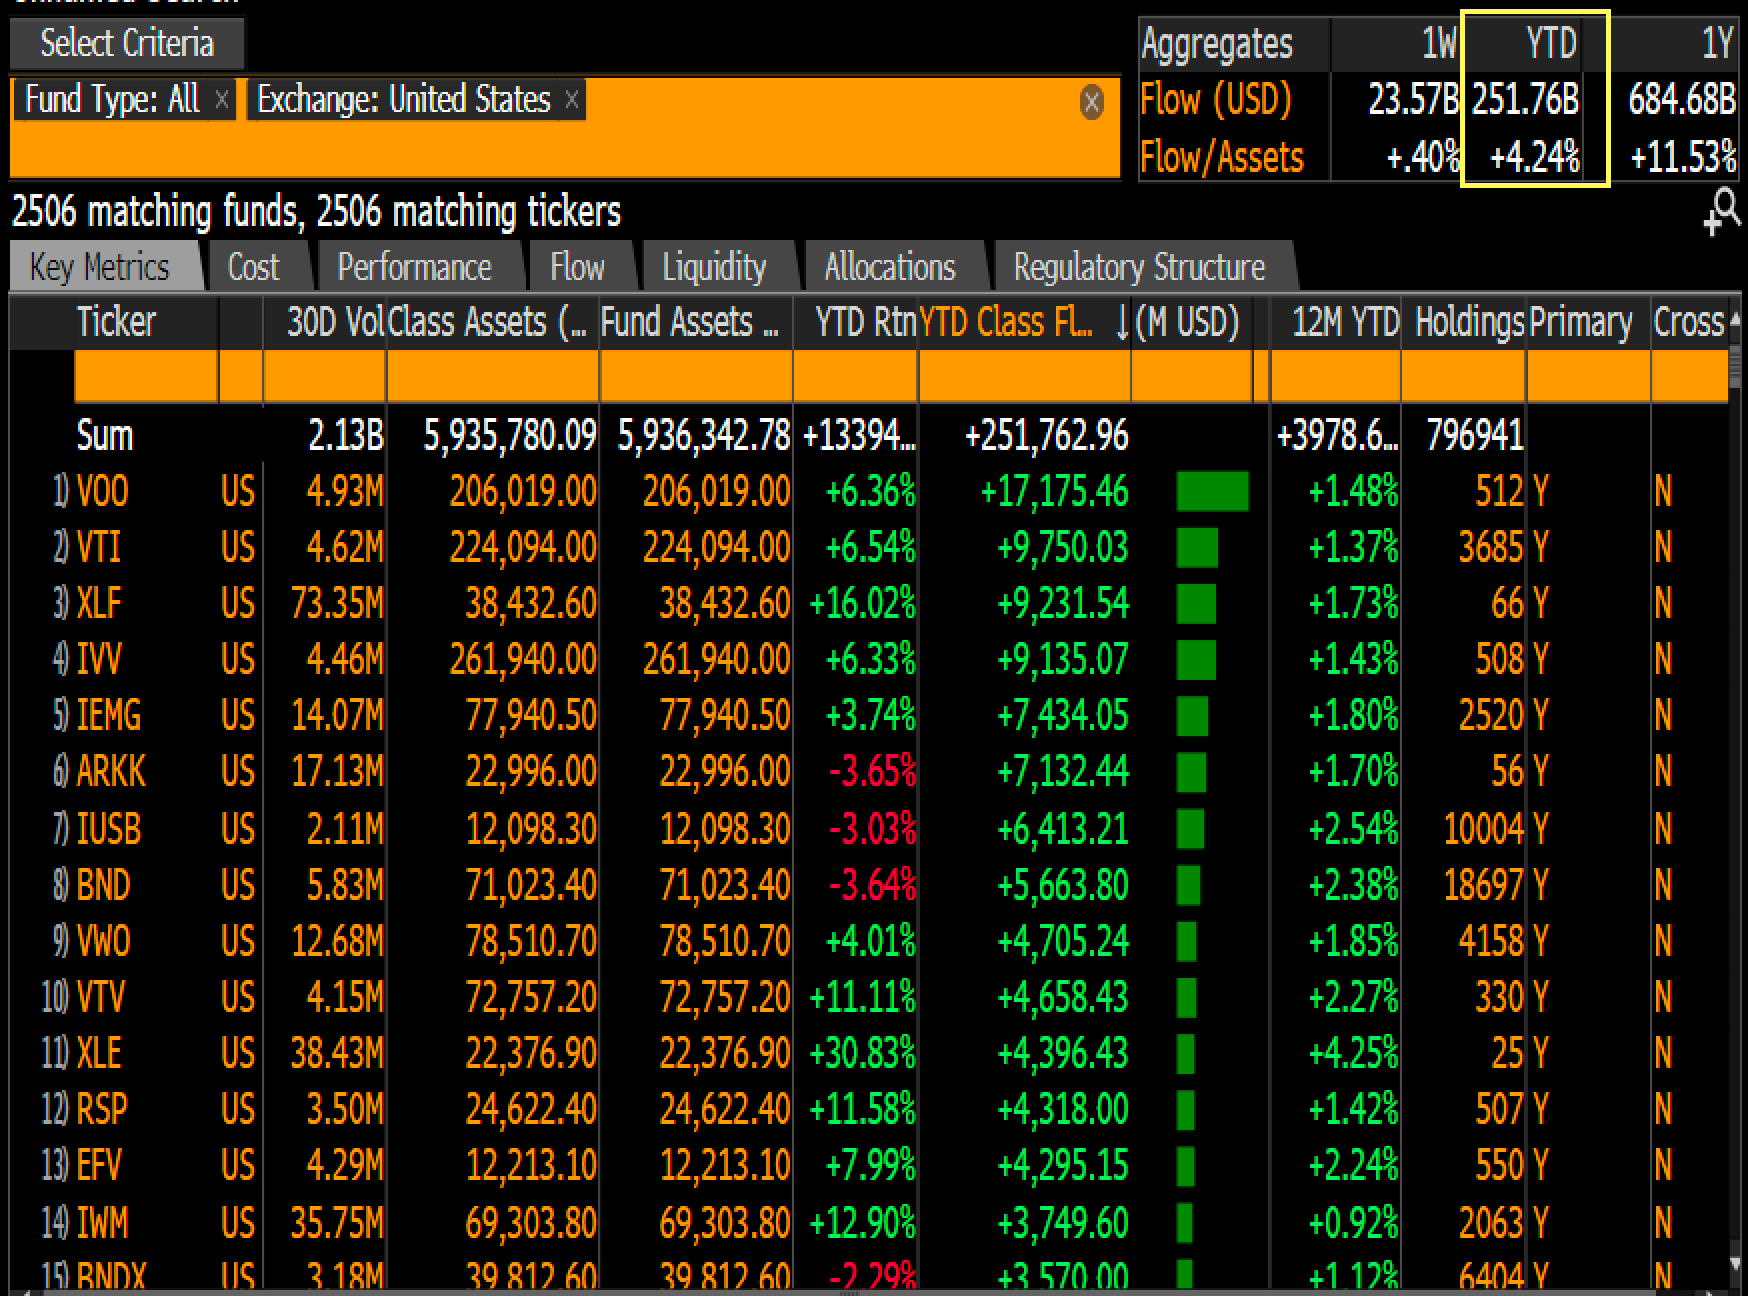 TOP 15 ETFs by inflows year-to-date